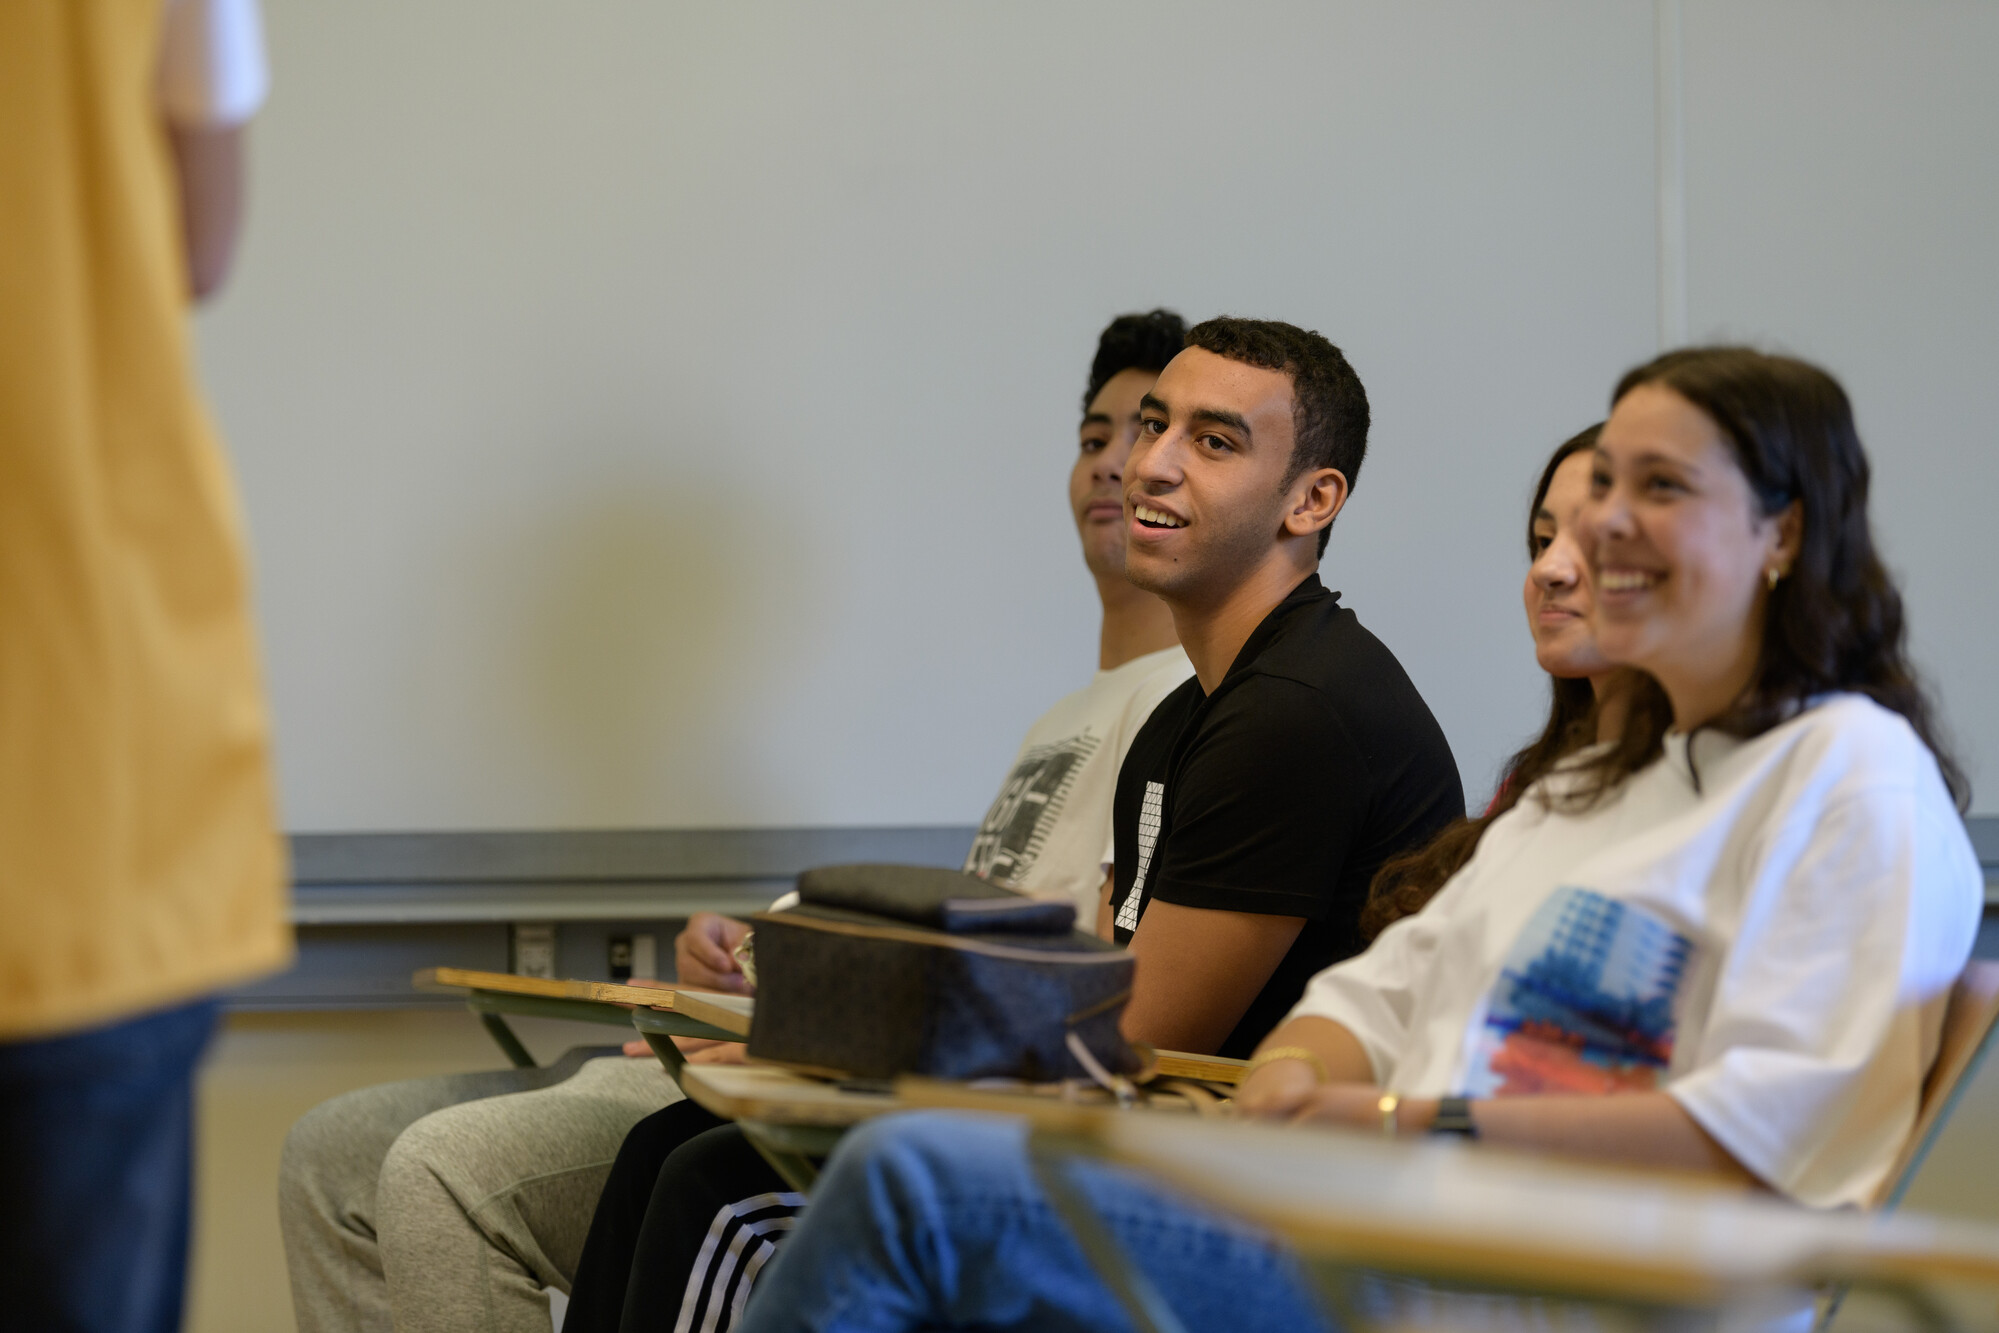 Smiling students in class attending class  